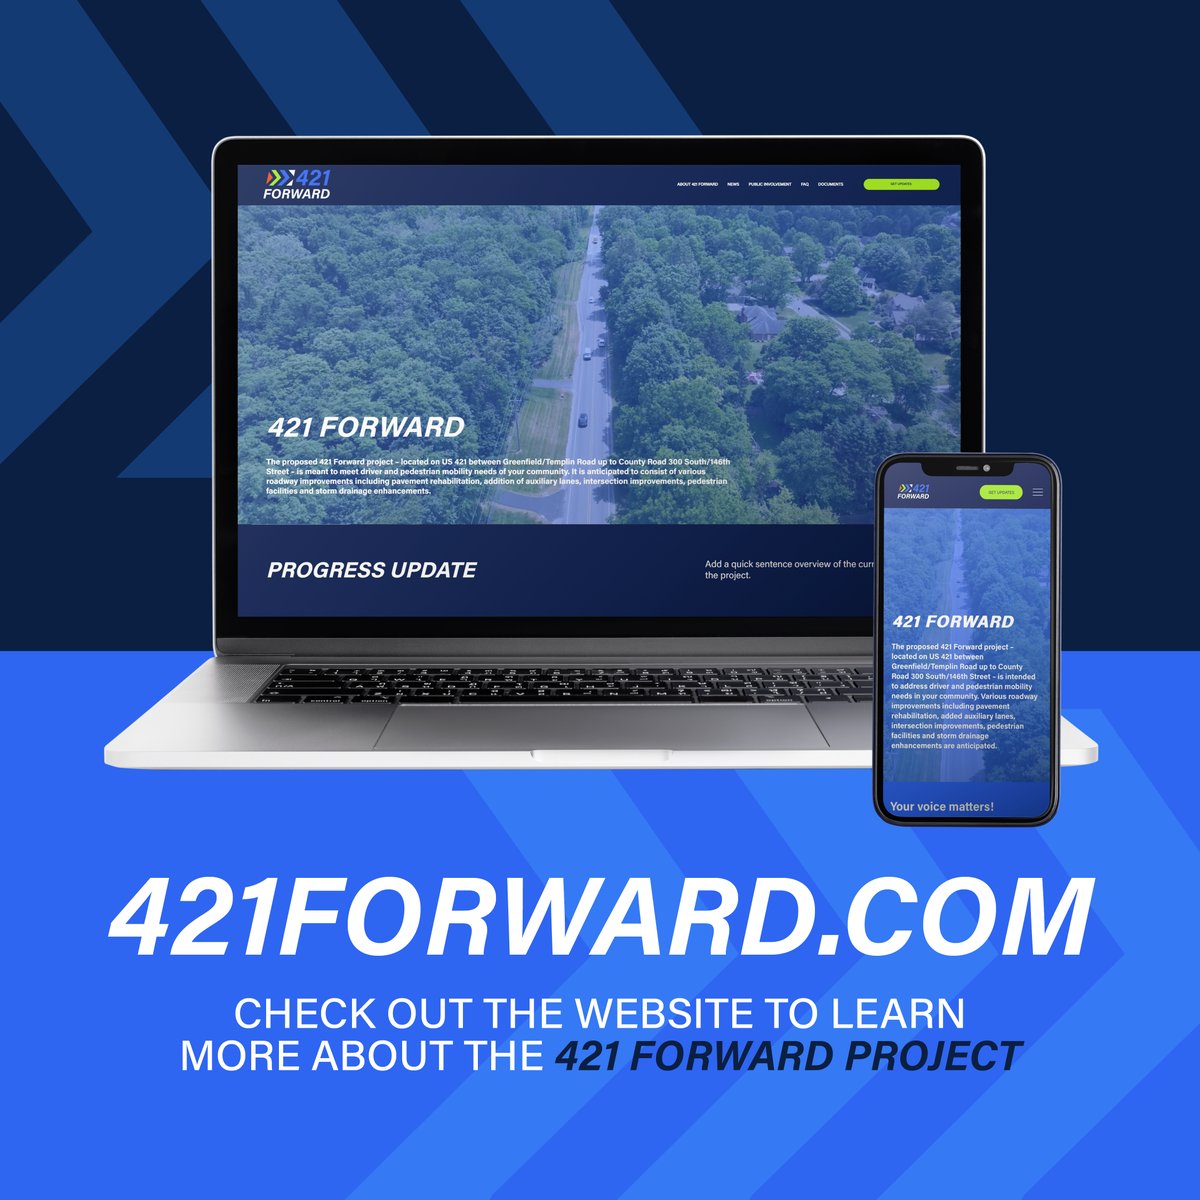 Are you interested in learning more about the 421 Forward project? Visit our website: 421forward.com